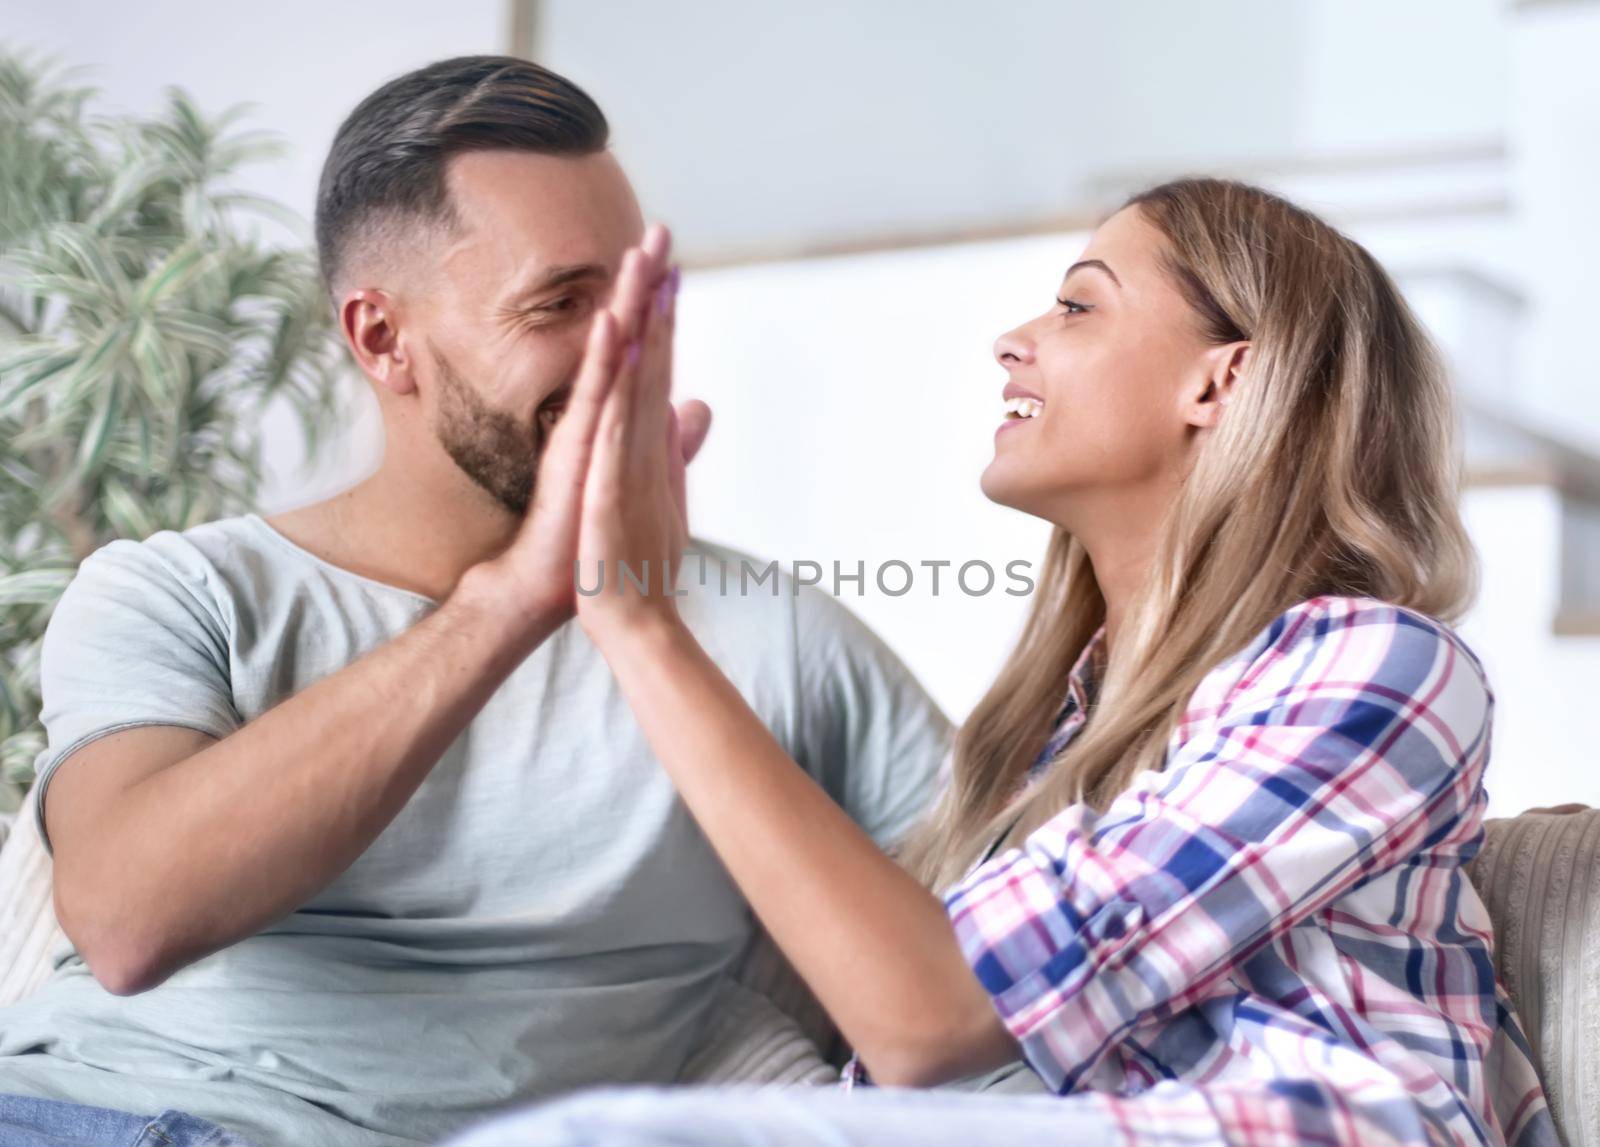 young couple giving each other a high five by asdf